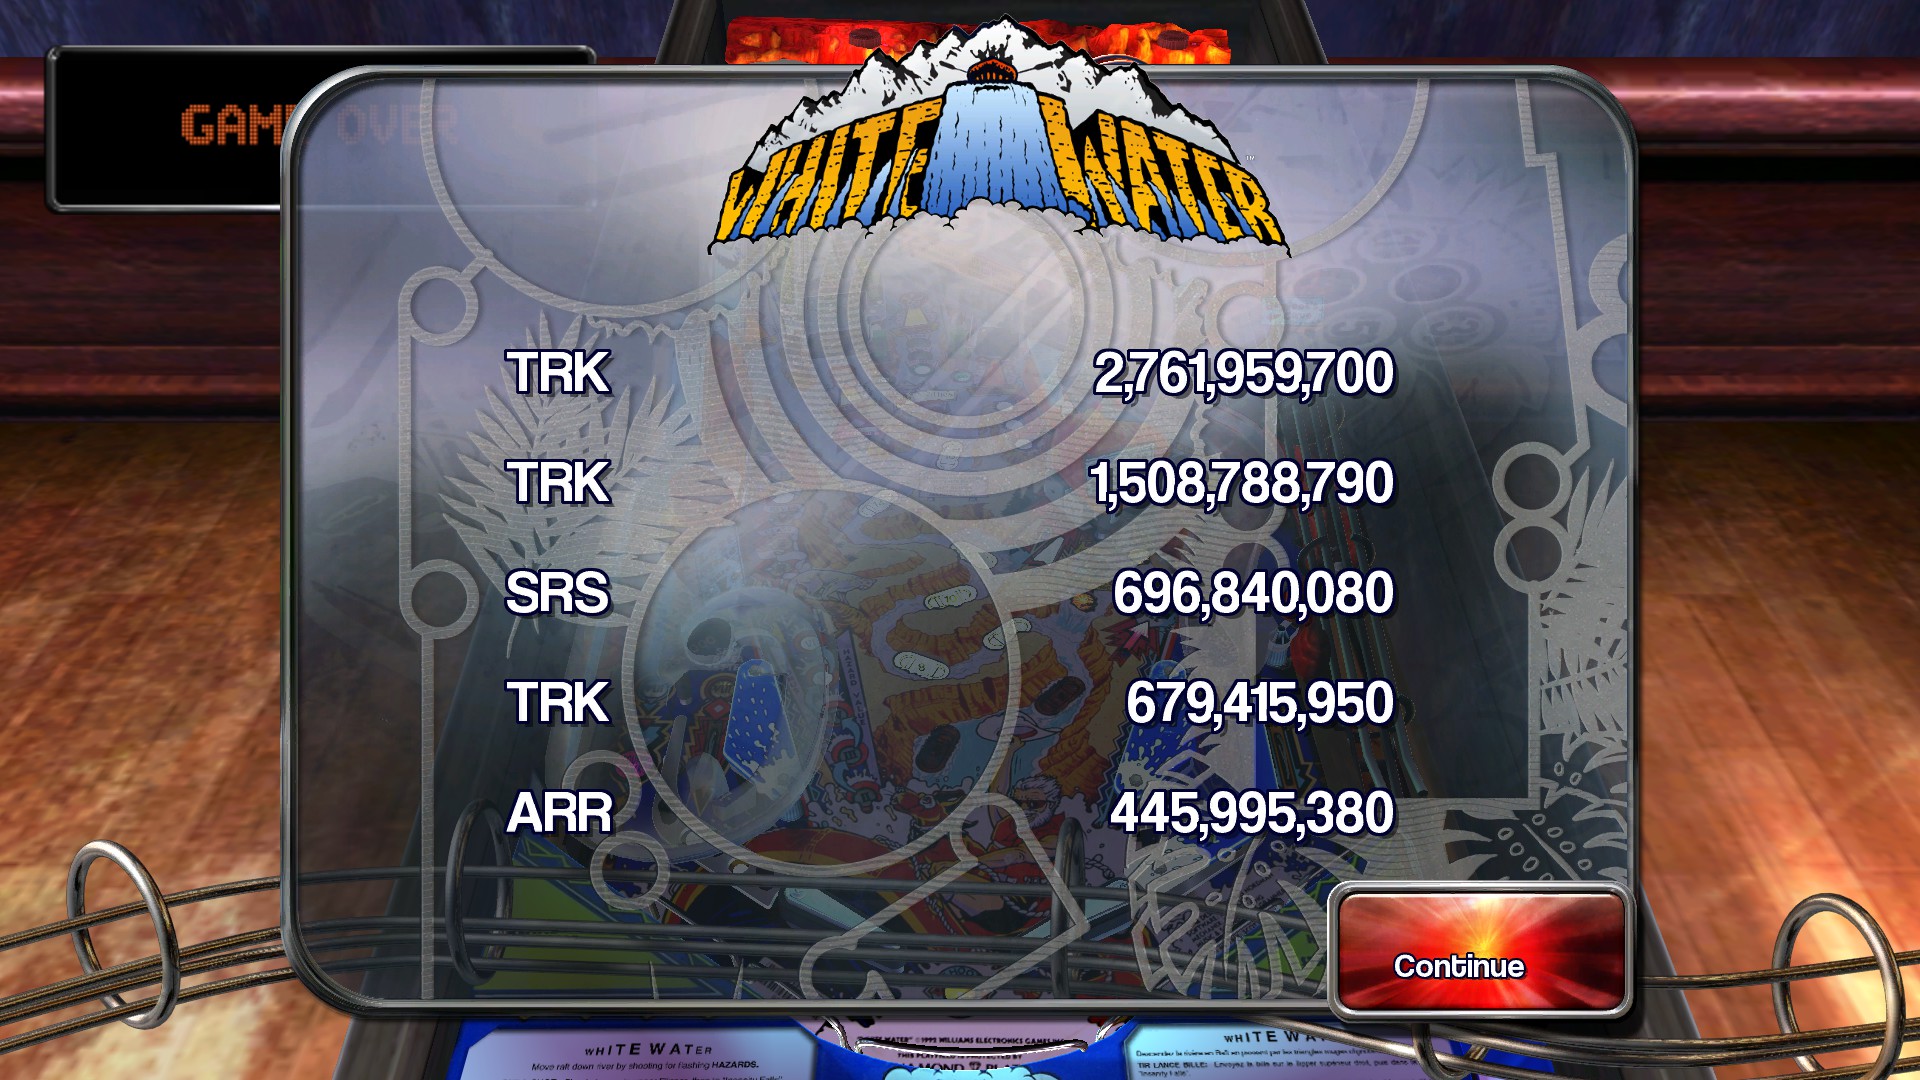 TheTrickster: Pinball Arcade: White Water (PC) 2,761,959,700 points on 2016-04-10 07:06:20